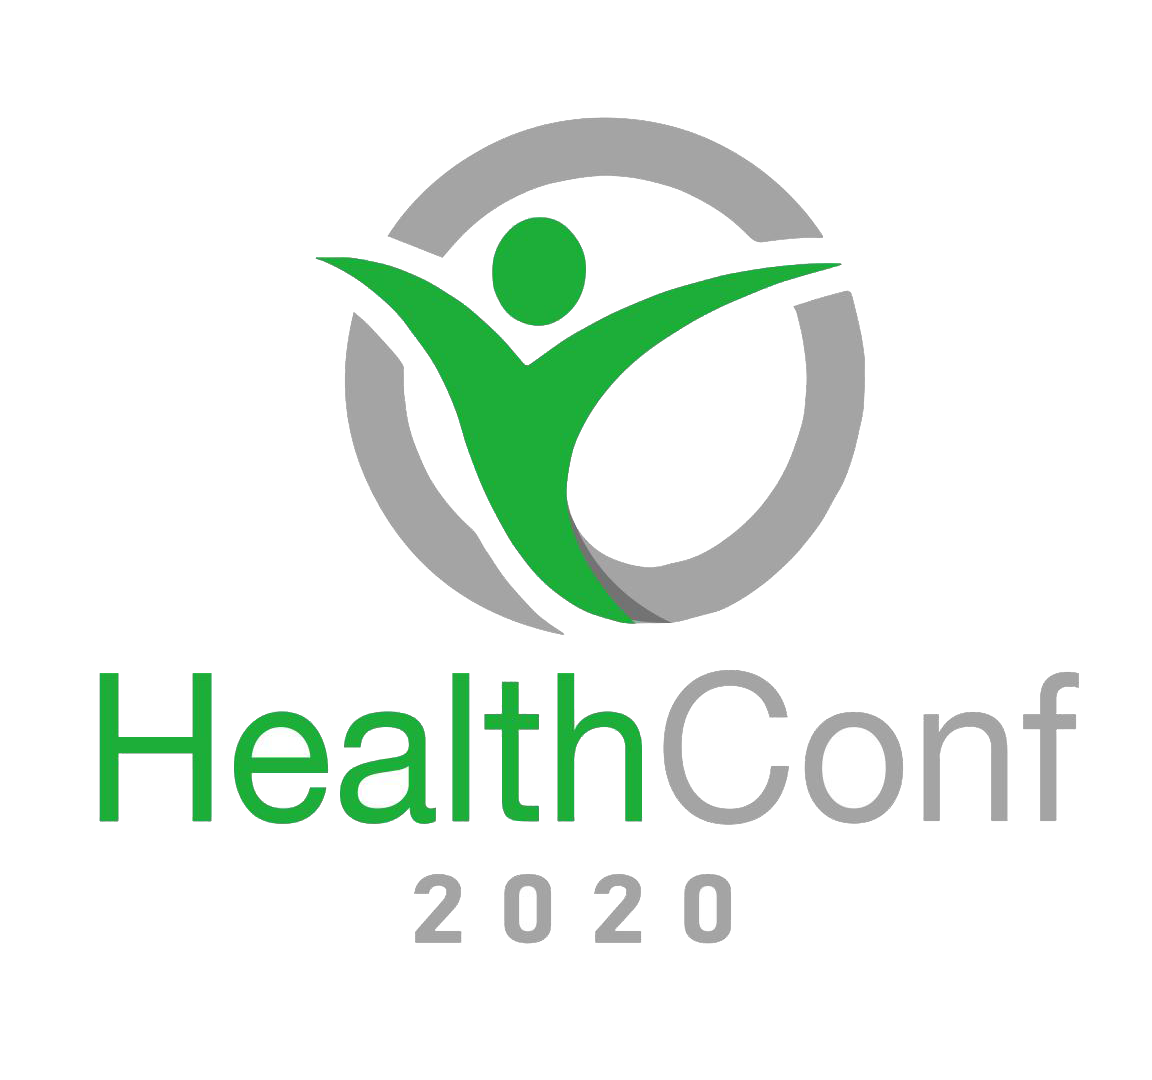 3rd International Conference on Public Health 2020 (Health Conf 2020)